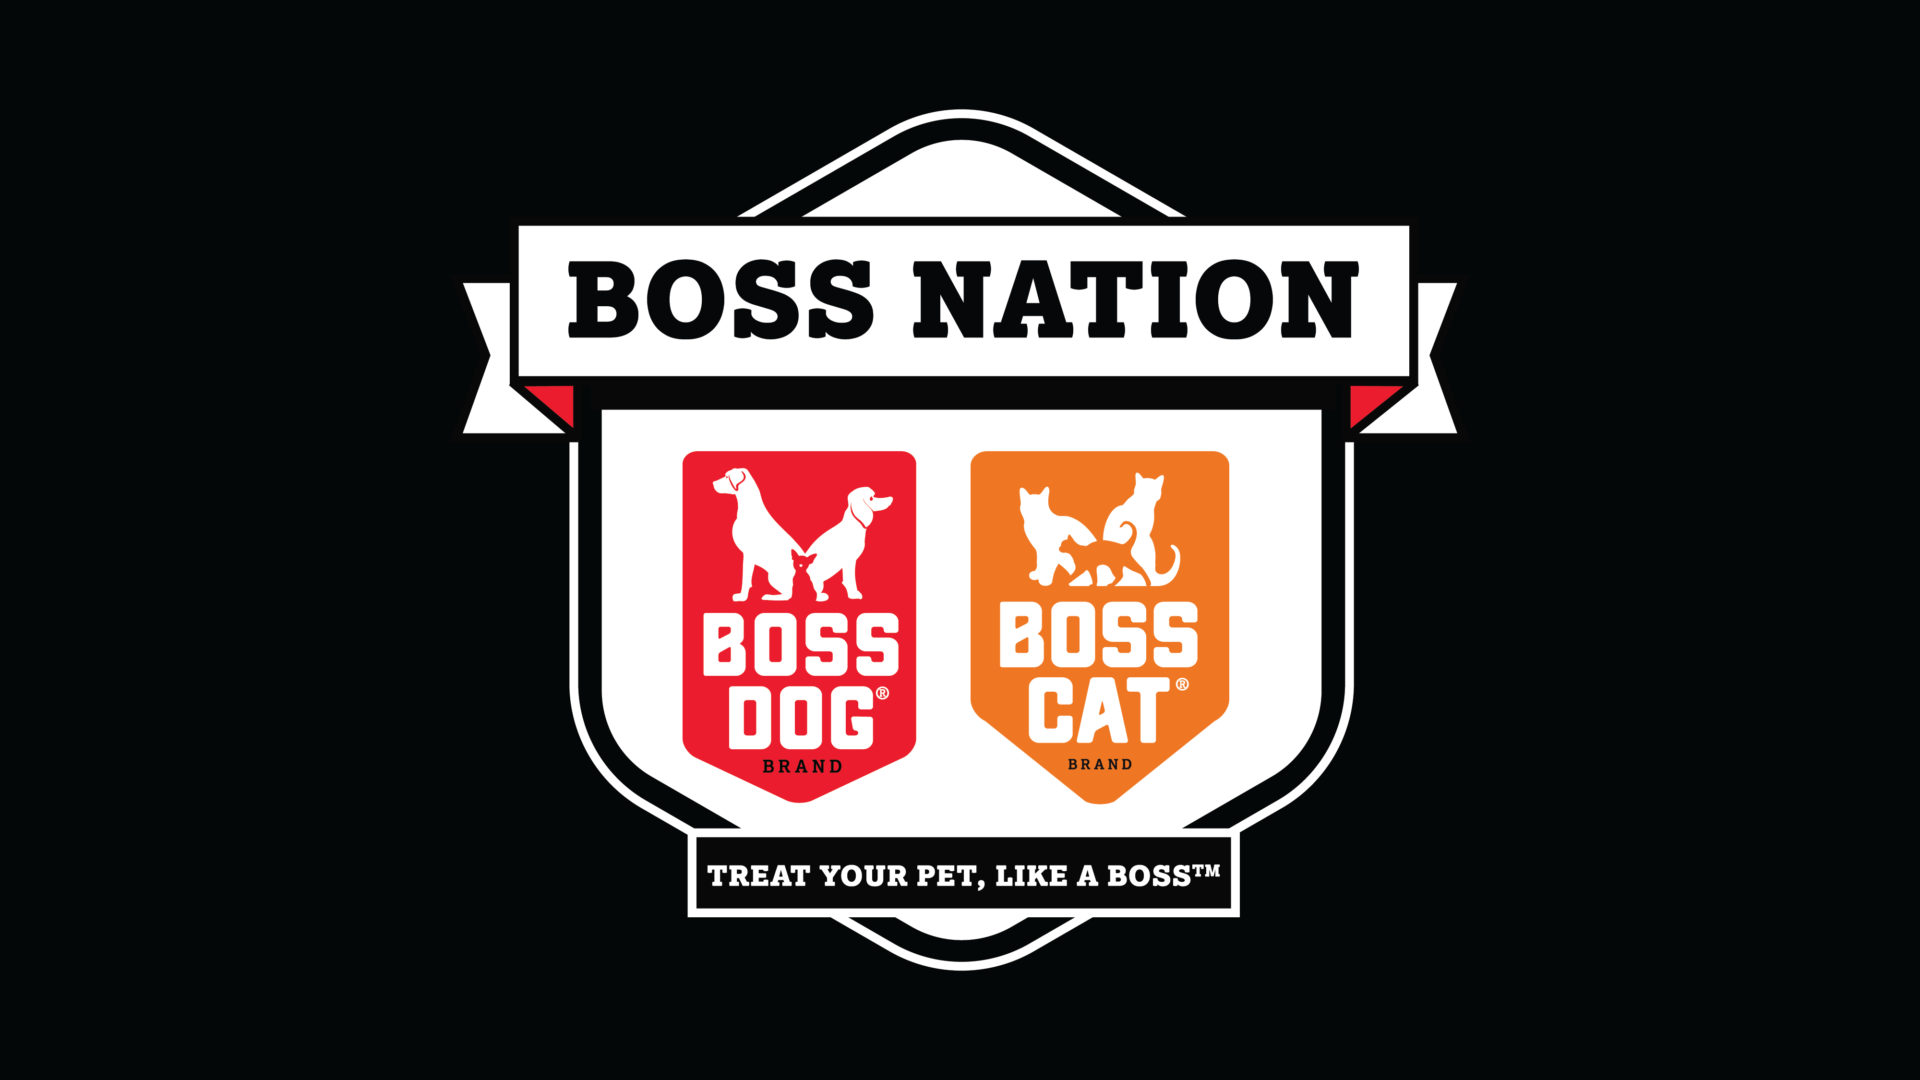 A black and white logo of boss dog and boss cat.